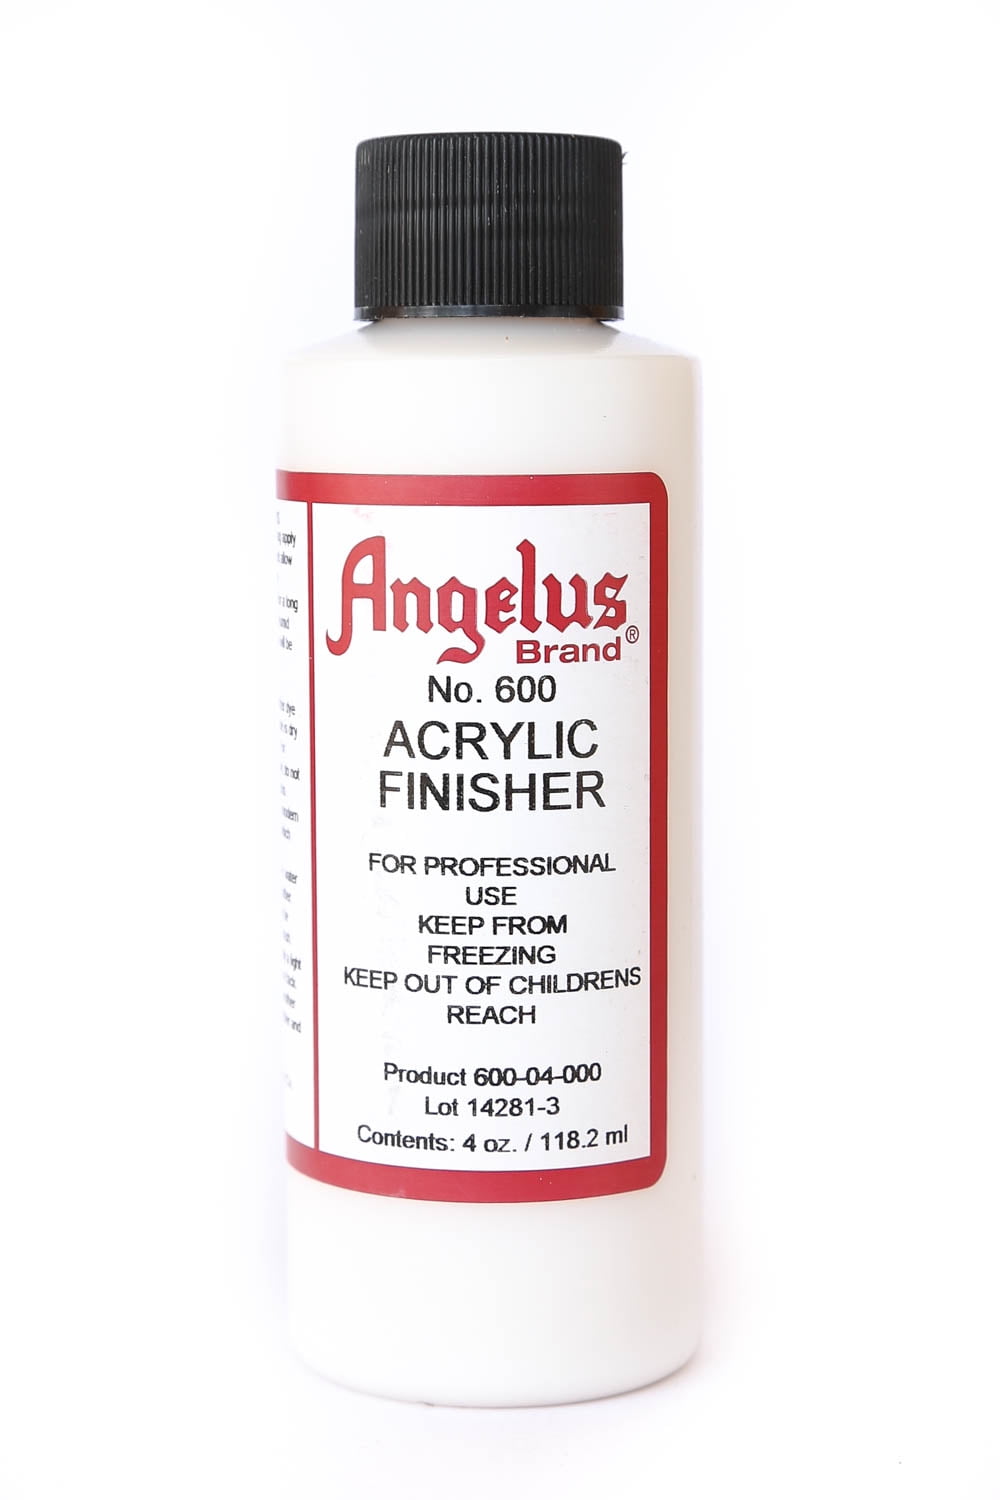  Angelus Brand Acrylic Leather Paint Water Resistant 1 oz -  Select Your Color (#14 Brown)